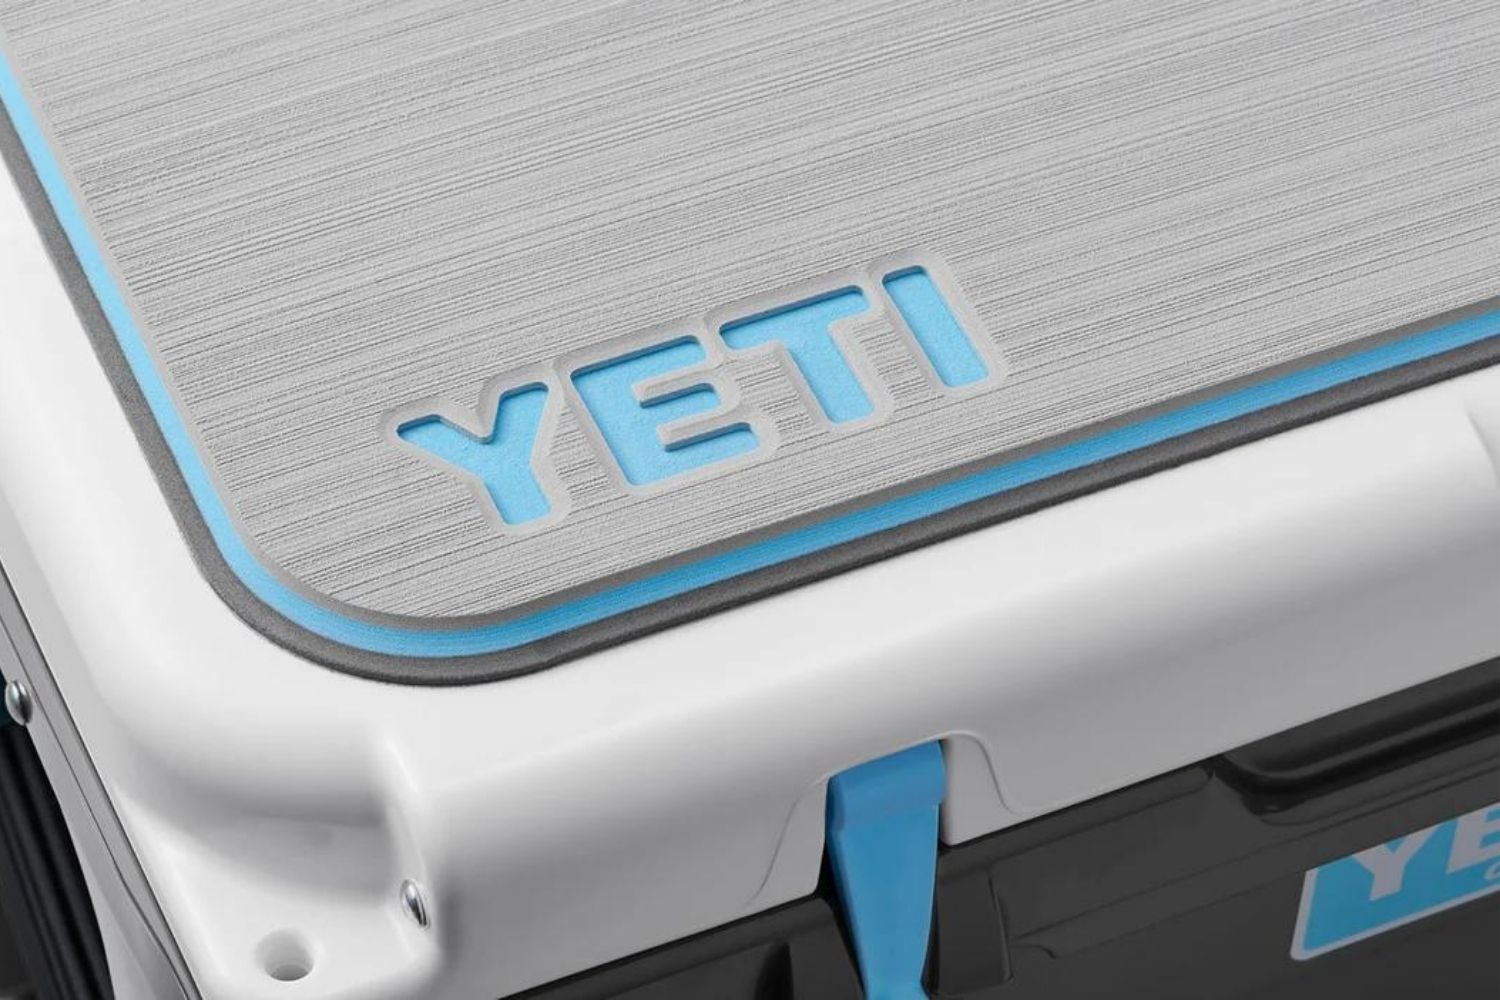 https://brobible.com/wp-content/uploads/2021/08/Celebrate-Yetis-15th-Anniversary-With-This-Limited-Edition-XV-Tundra-50.jpg